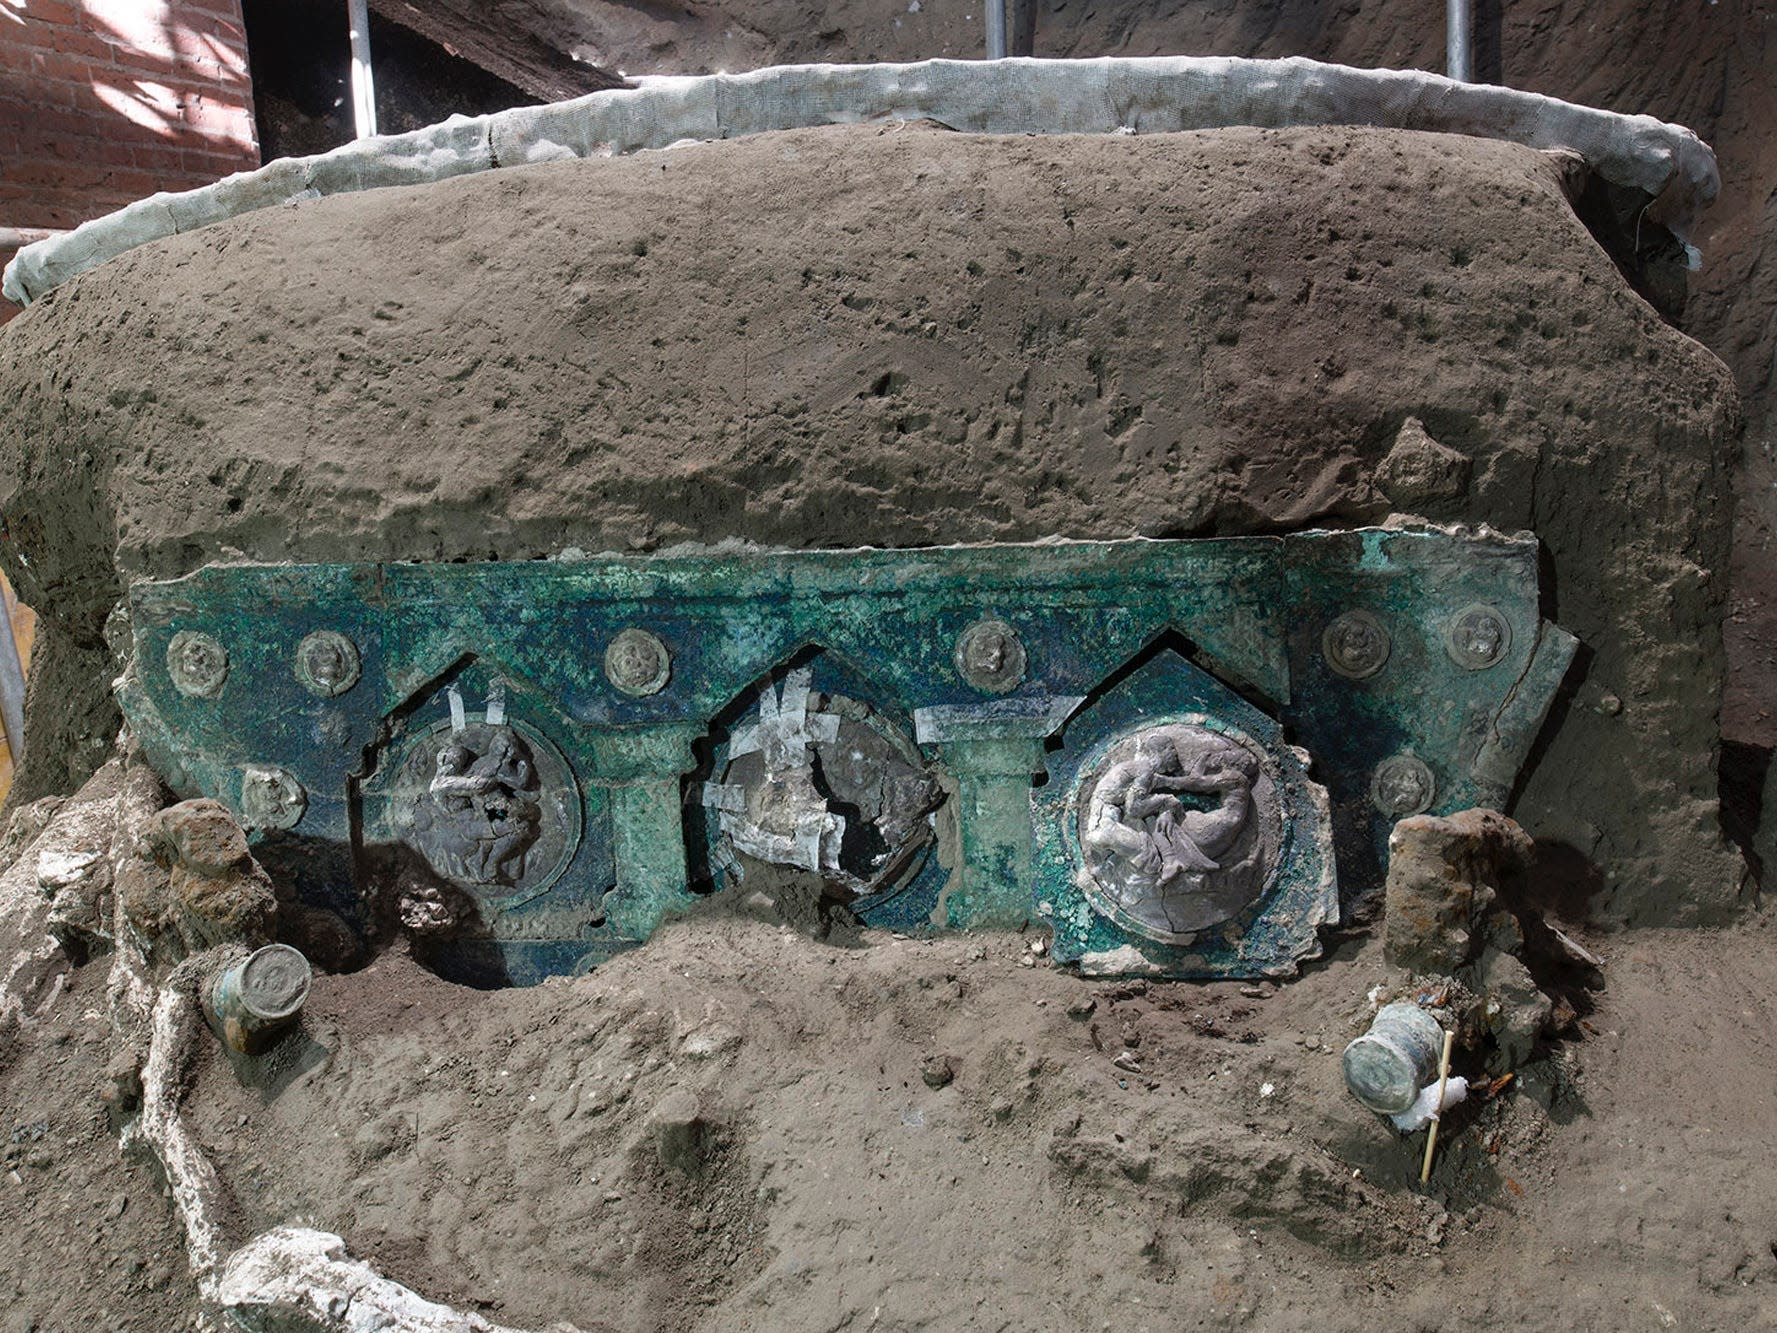 Archaeologists found the “Lamborghini” of preserved carriages near Pompeii